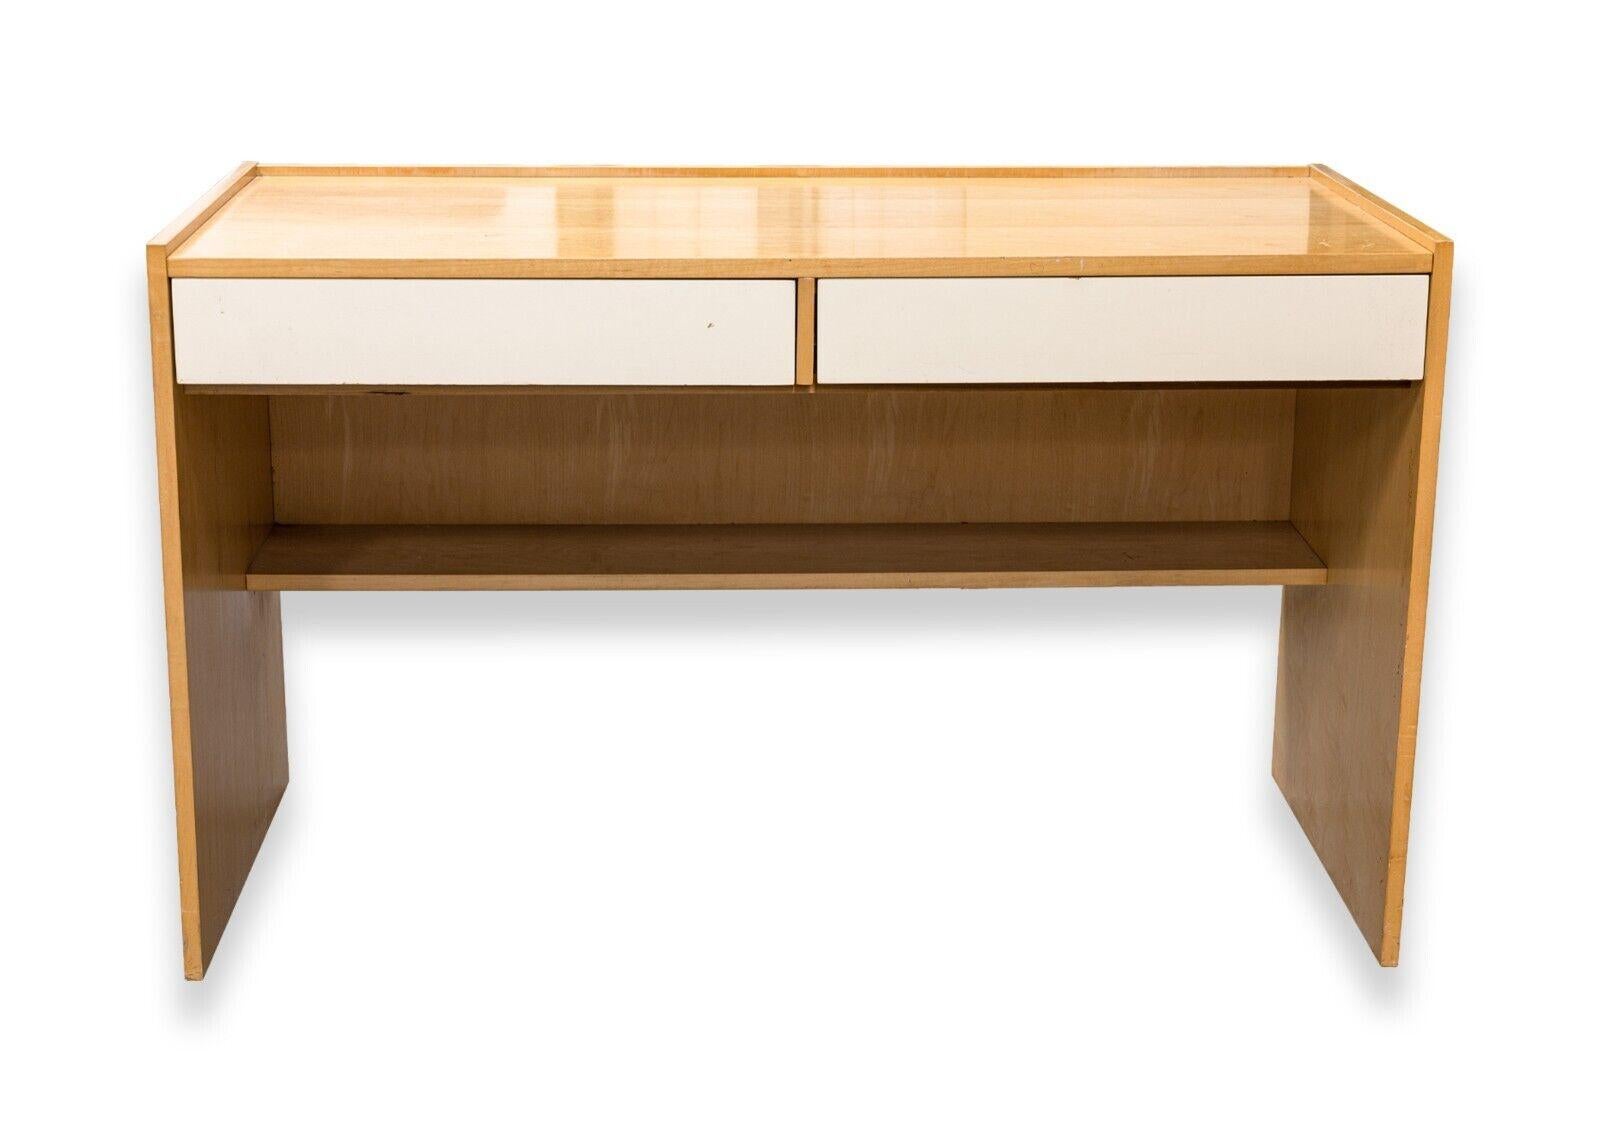 A Jack Cartwright birch wood desk for Founders Furniture. A gorgeous birch wood desk designed by Jack Cartwright. This wonderful desk features a fully wood constriction, two pull out drawers, a lower foot shelf, and a fully finished frame. The